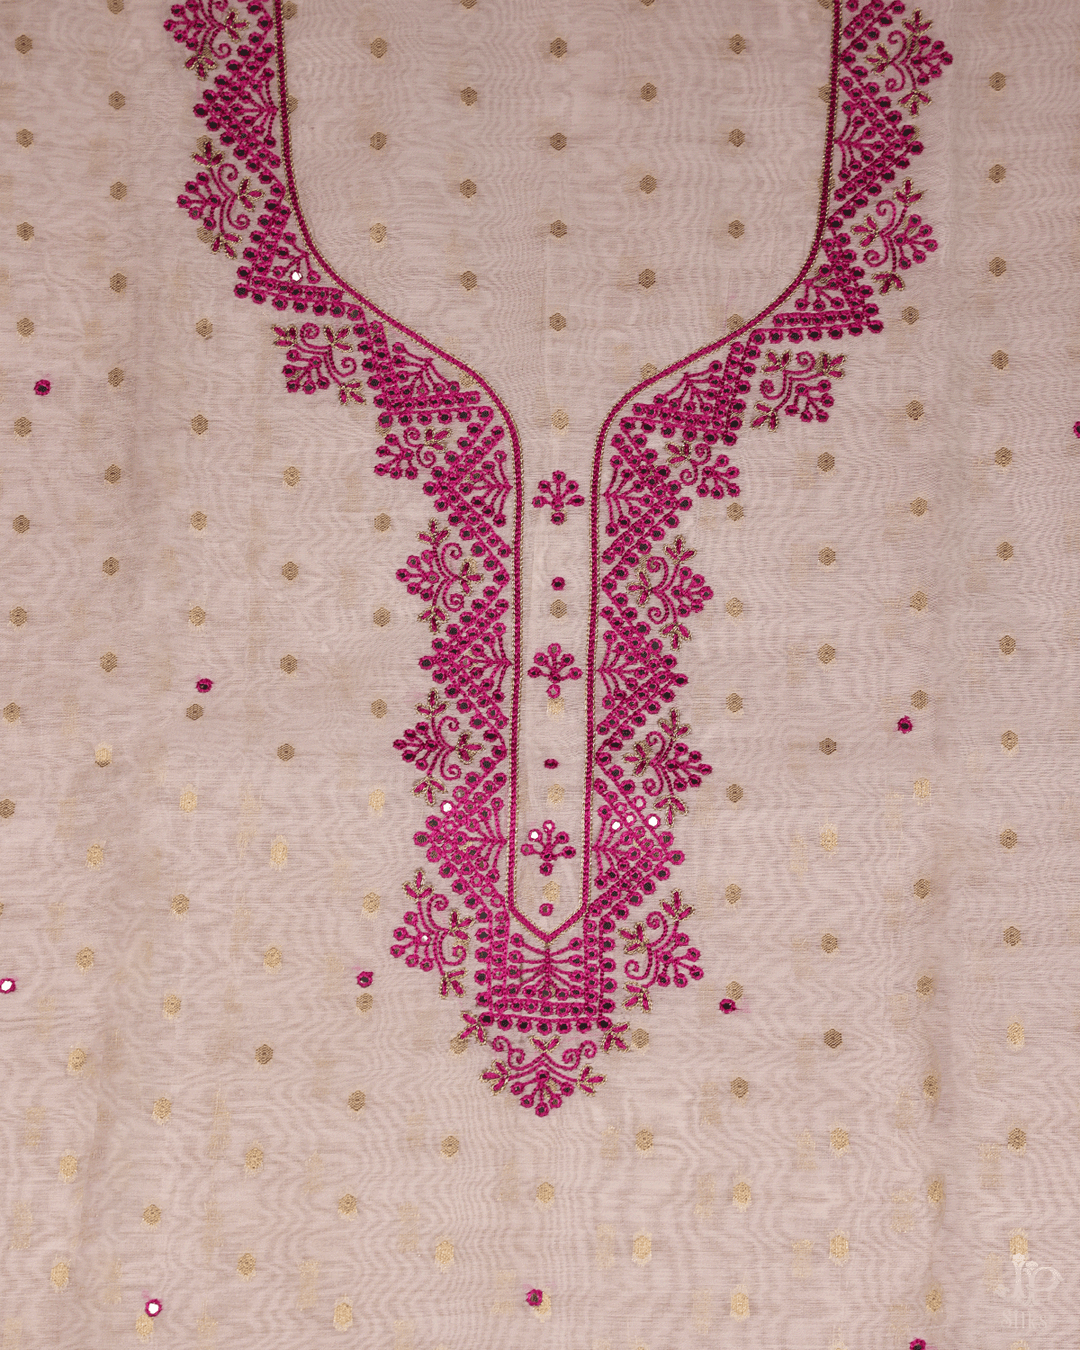 Rani Pink and Off - White Unstitched Chudidhar Material - D7101 - View 3